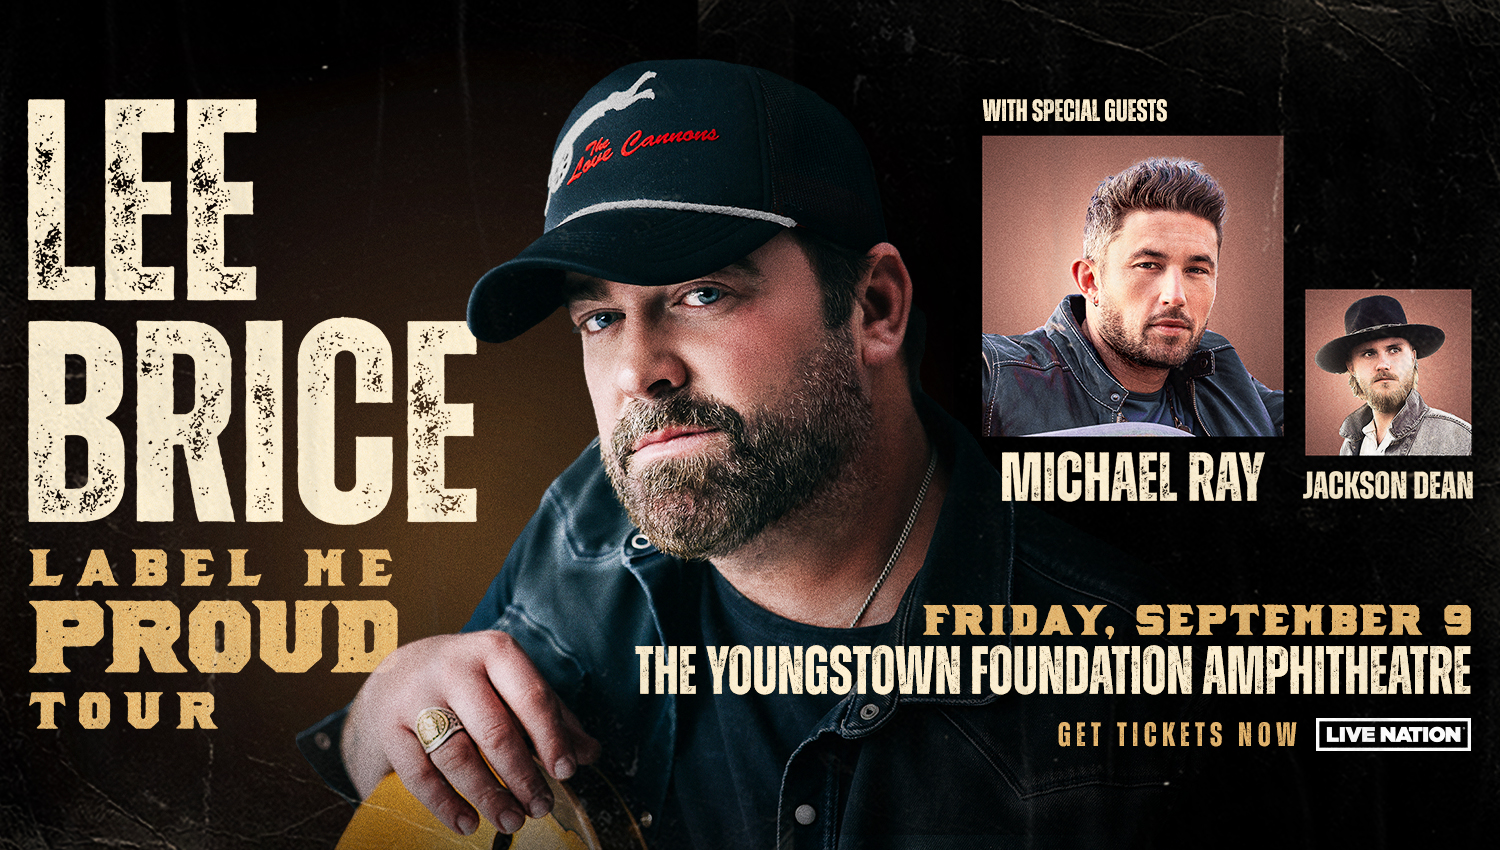 Lee Brice: Label Me Proud Tour with special guests Michael Ray and Jackson Dean.